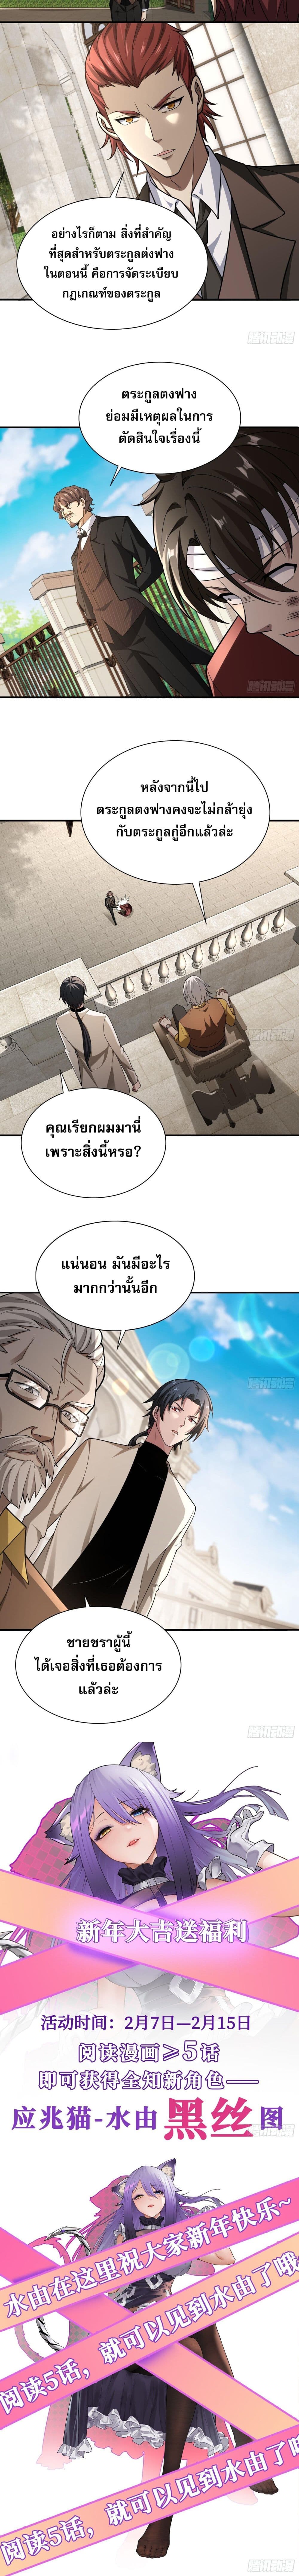 The All-Knowing Cultivator ผู้ฝึกตนผู้รอบรู้ 10/12